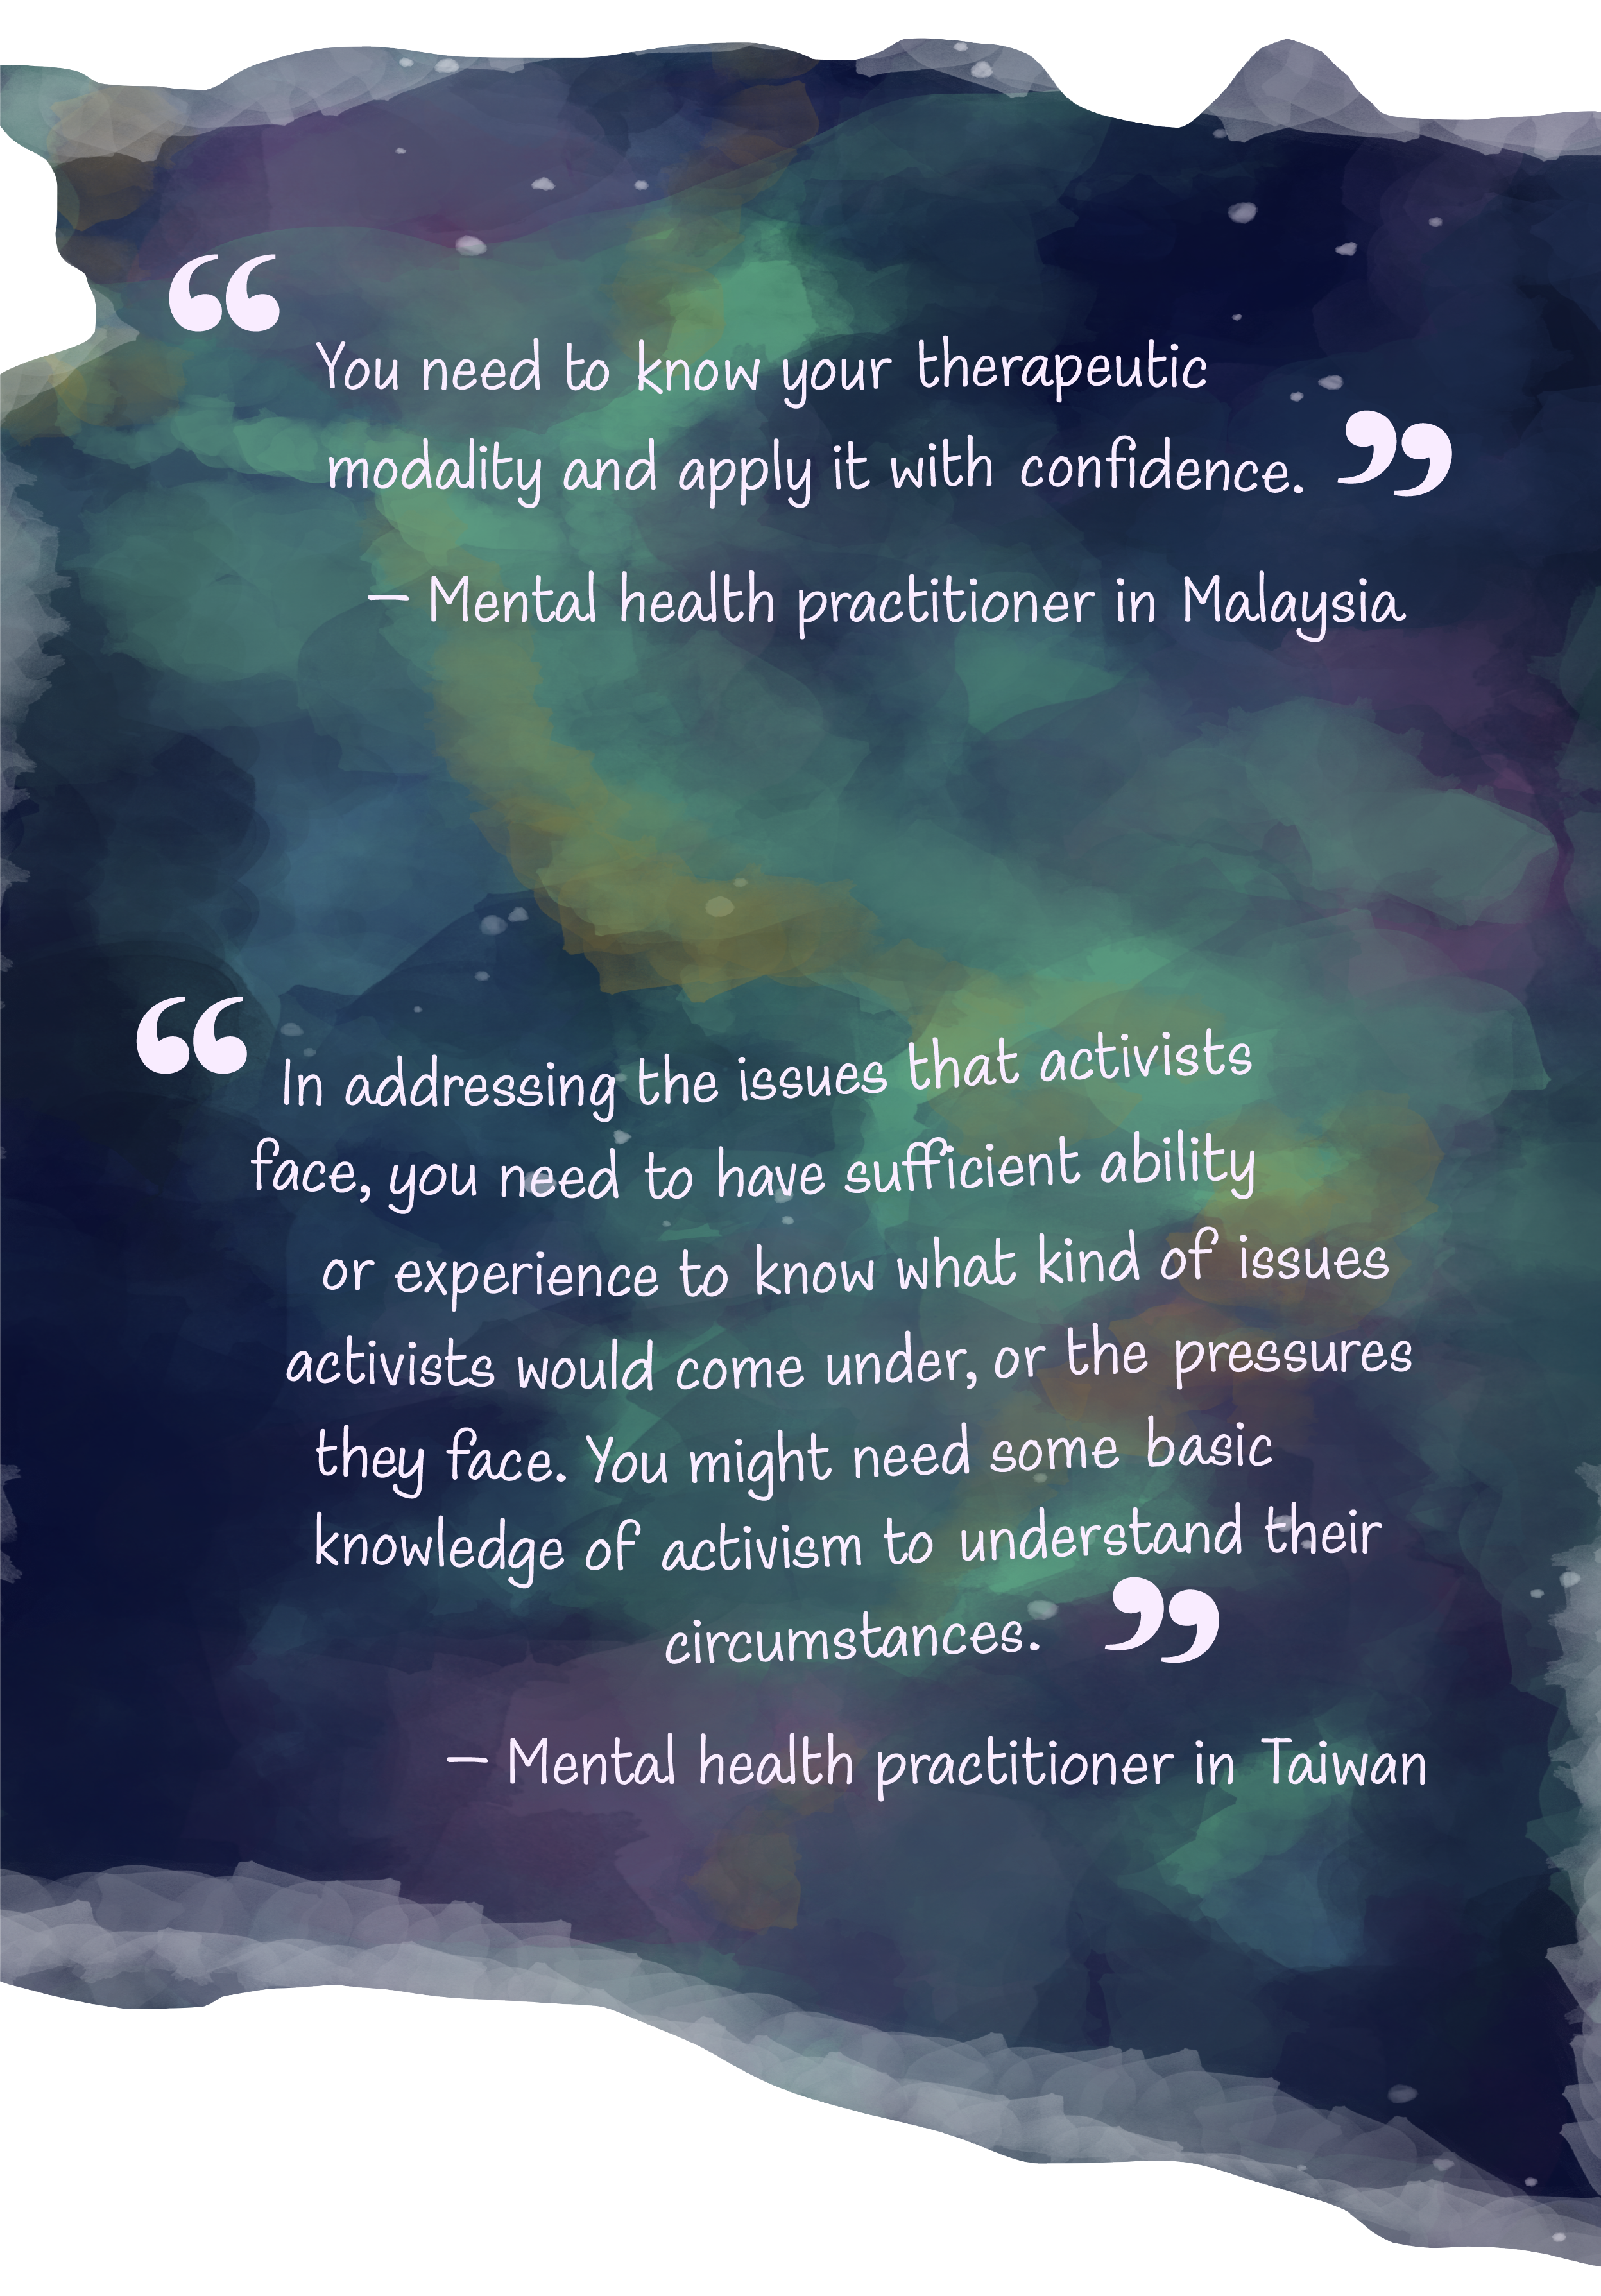 A watercolor wash that looks like a purplish–blue galaxy with clouds of green. Written on top are 2 quotes from 2 mental health practitioners. The first quote by a mental health practitioner in Malaysia is “You need to know your therapeutic modality and apply it with confidence”. The last quote is from a practitioner in Taiwan that goes, “In addressing the issues that activists face, you need to have sufficient ability or experience to know what kind of issues activists would come under, or the pressures they face. You might need some basic knowledge of activism to understand their circumstances”.